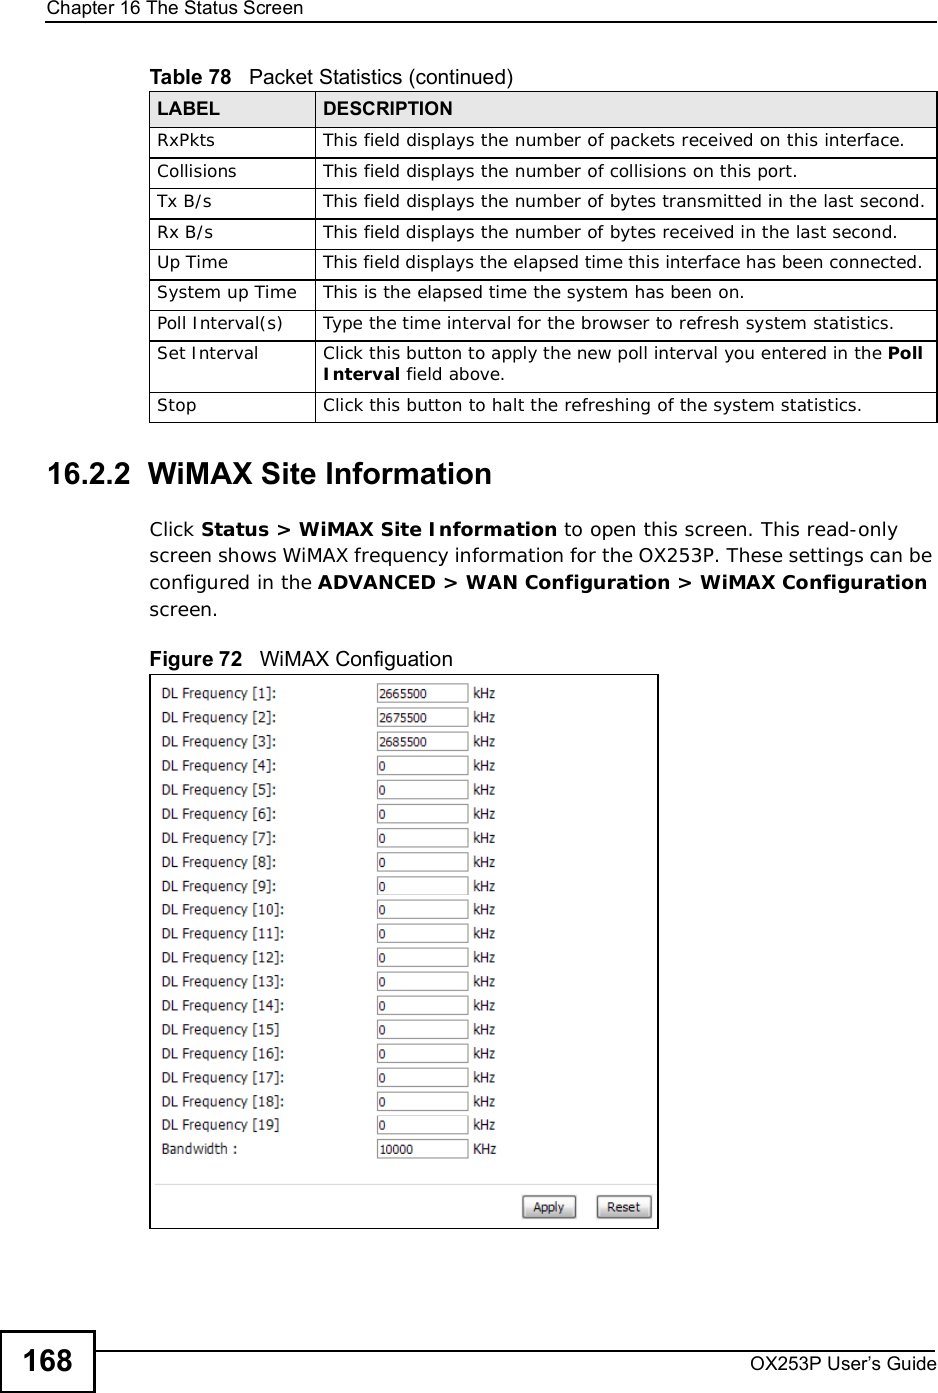 Chapter 16The Status ScreenOX253P User’s Guide16816.2.2  WiMAX Site InformationClick Status &gt; WiMAX Site Information to open this screen. This read-only screen shows WiMAX frequency information for the OX253P. These settings can be configured in the ADVANCED &gt; WAN Configuration &gt; WiMAX Configuration screen.Figure 72   WiMAX Configuation RxPkts  This field displays the number of packets received on this interface.Collisions This field displays the number of collisions on this port.Tx B/s  This field displays the number of bytes transmitted in the last second.Rx B/s This field displays the number of bytes received in the last second.Up Time  This field displays the elapsed time this interface has been connected. System up Time This is the elapsed time the system has been on.Poll Interval(s) Type the time interval for the browser to refresh system statistics.Set Interval Click this button to apply the new poll interval you entered in the PollInterval field above.Stop Click this button to halt the refreshing of the system statistics.Table 78   Packet Statistics (continued)LABEL DESCRIPTION